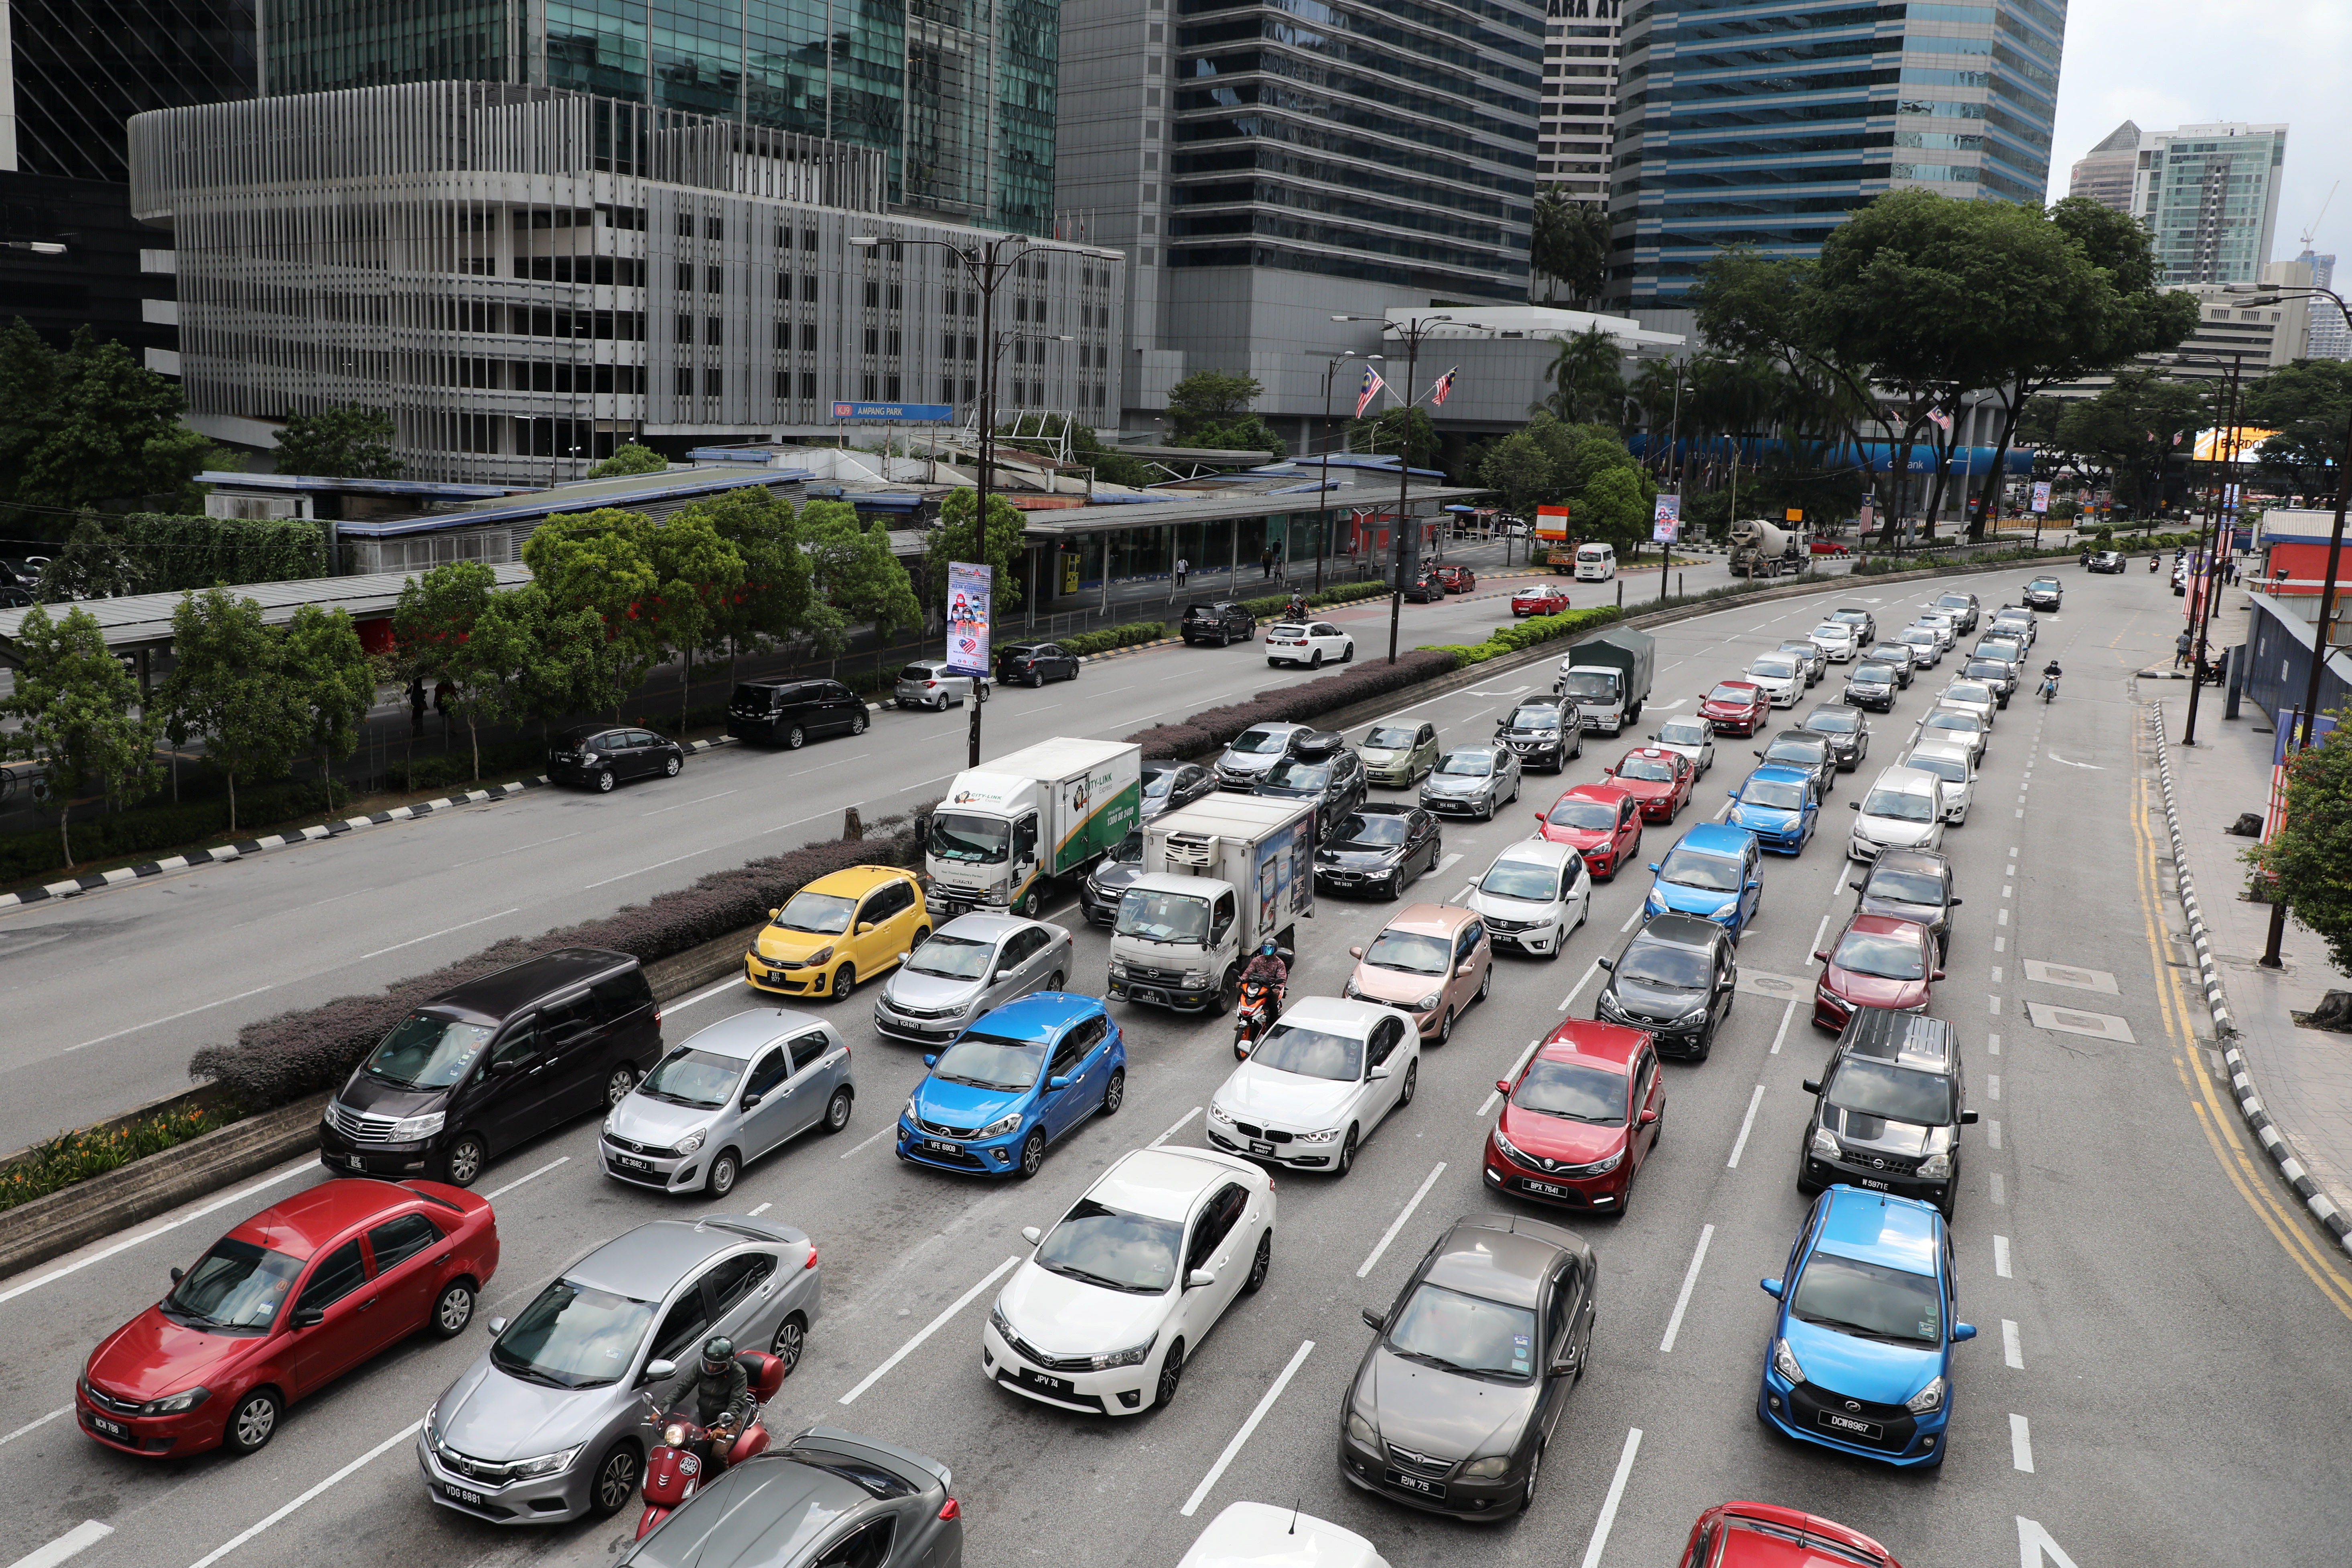 A general view of traffic in a business district in Kuala Lumpur